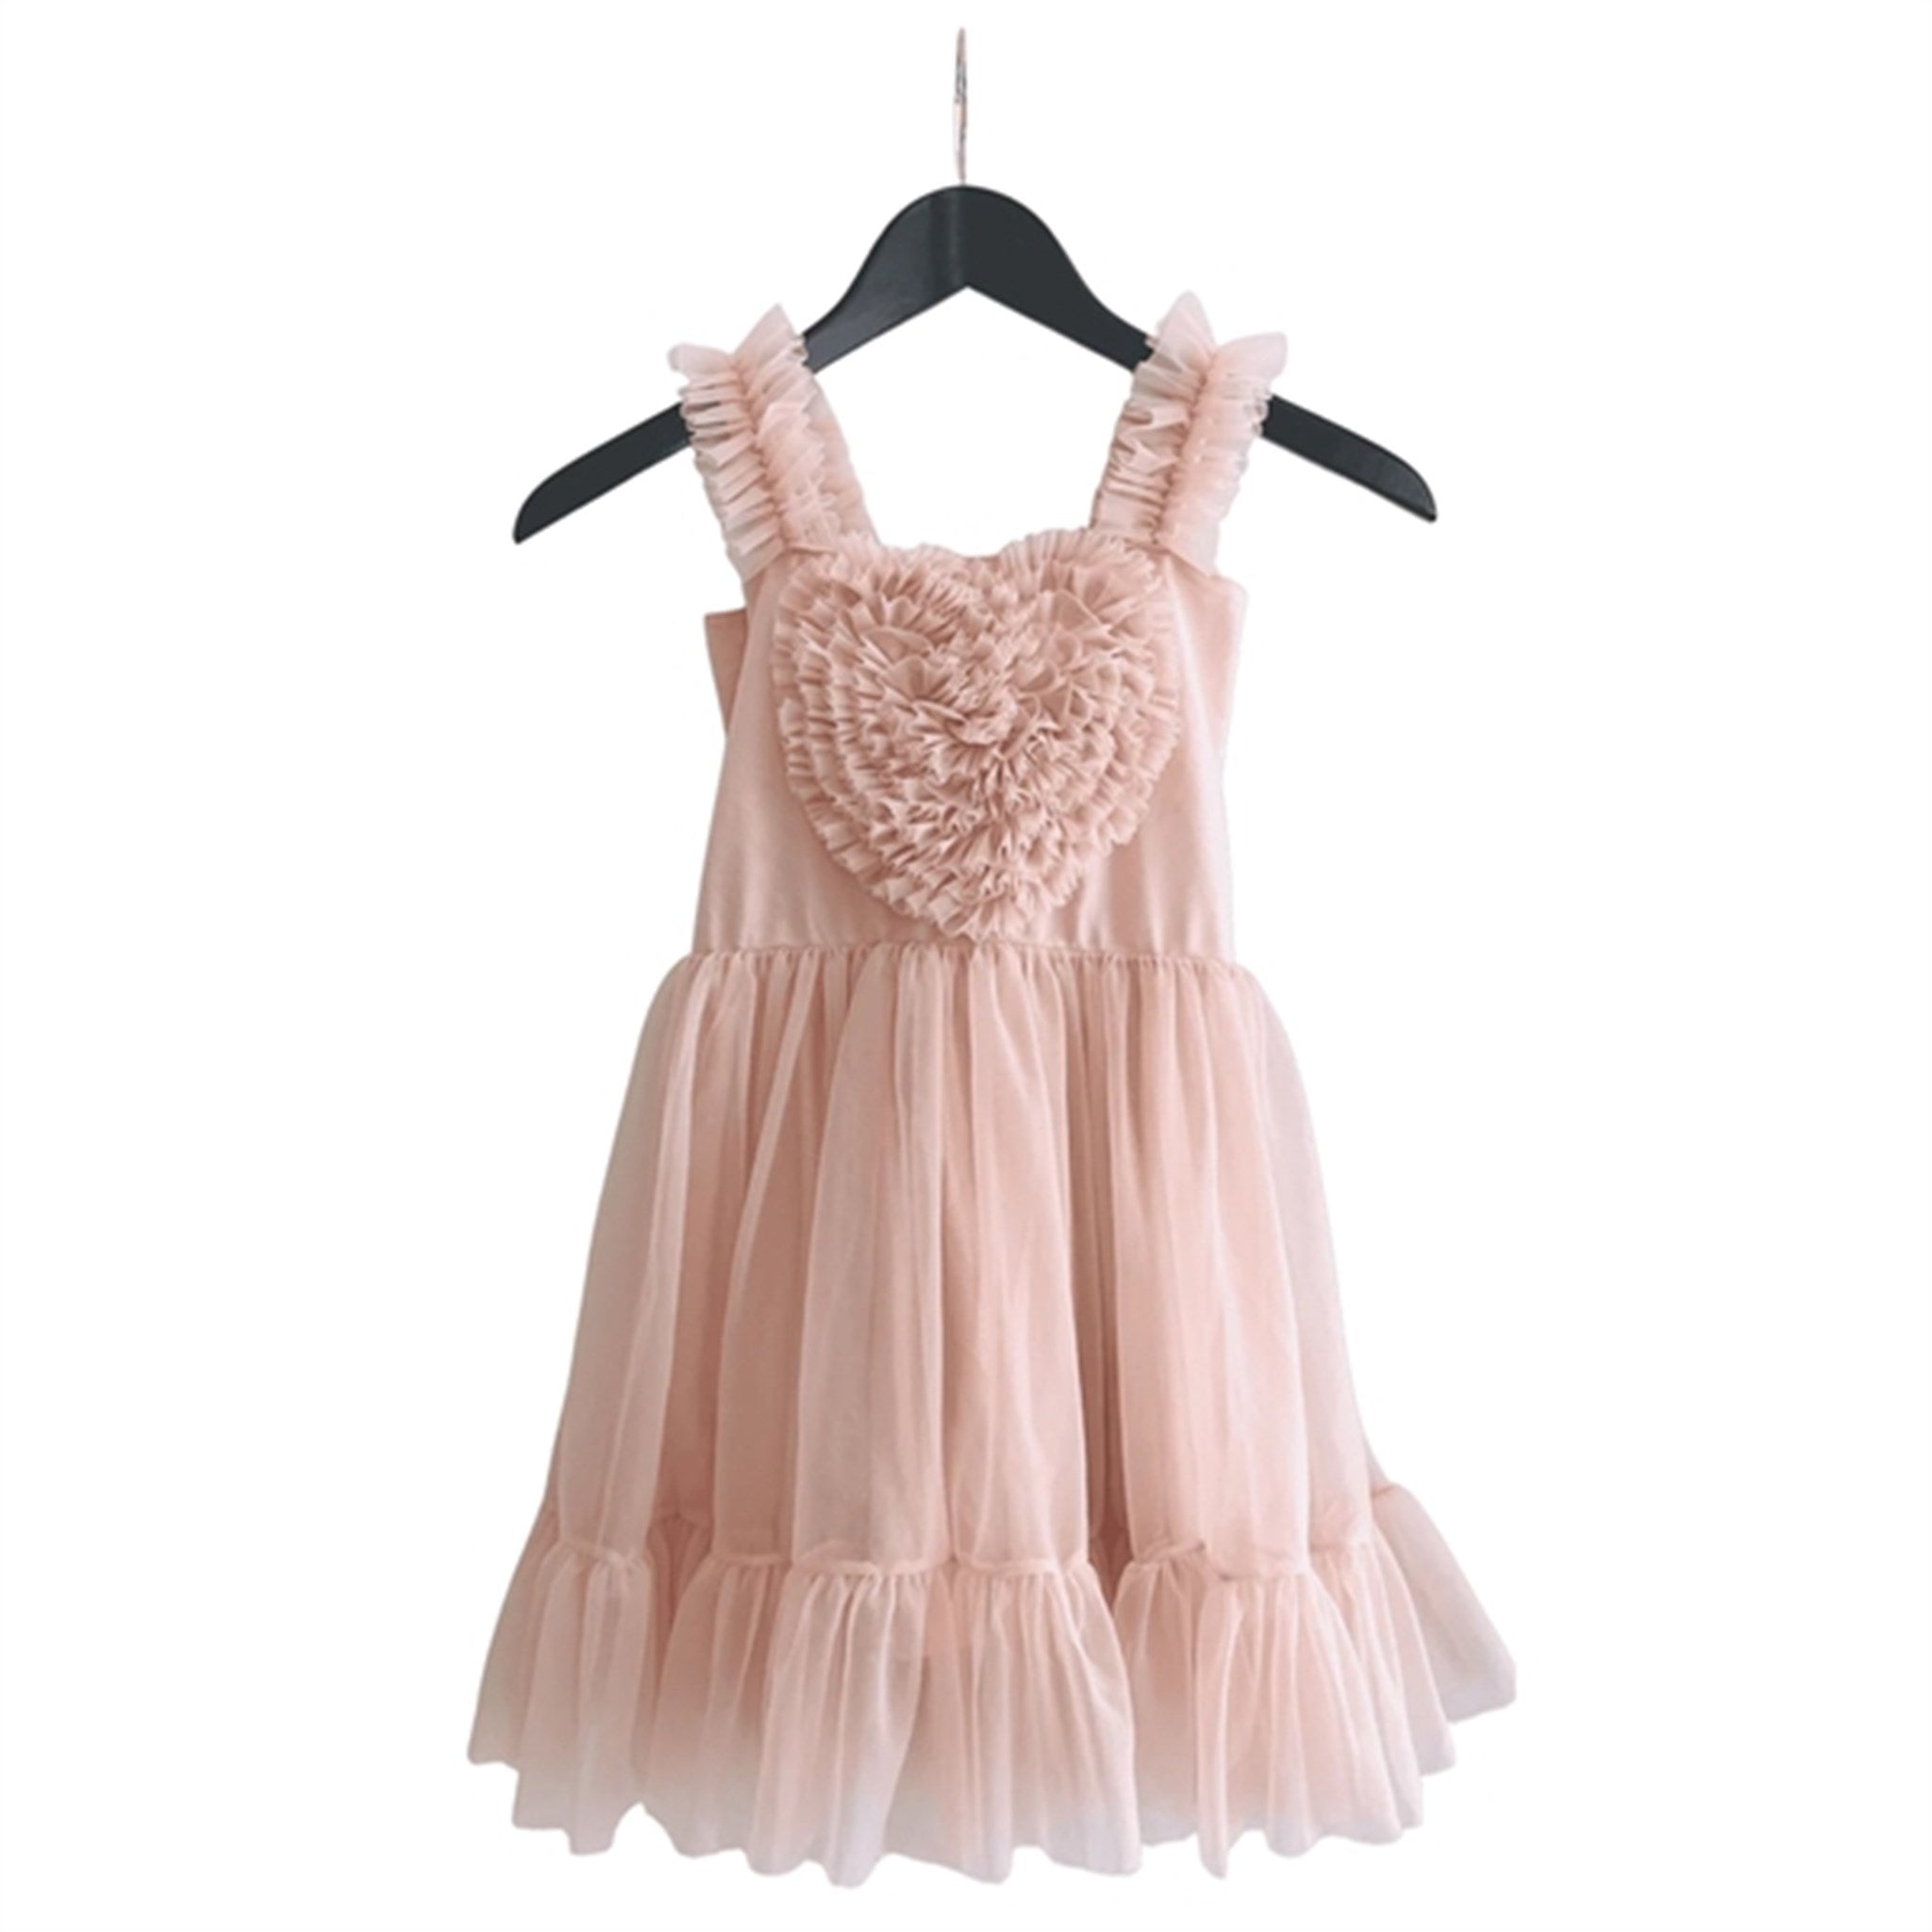 Dolly by Le Petit Heart Klänning Lace Up Ballet Pink